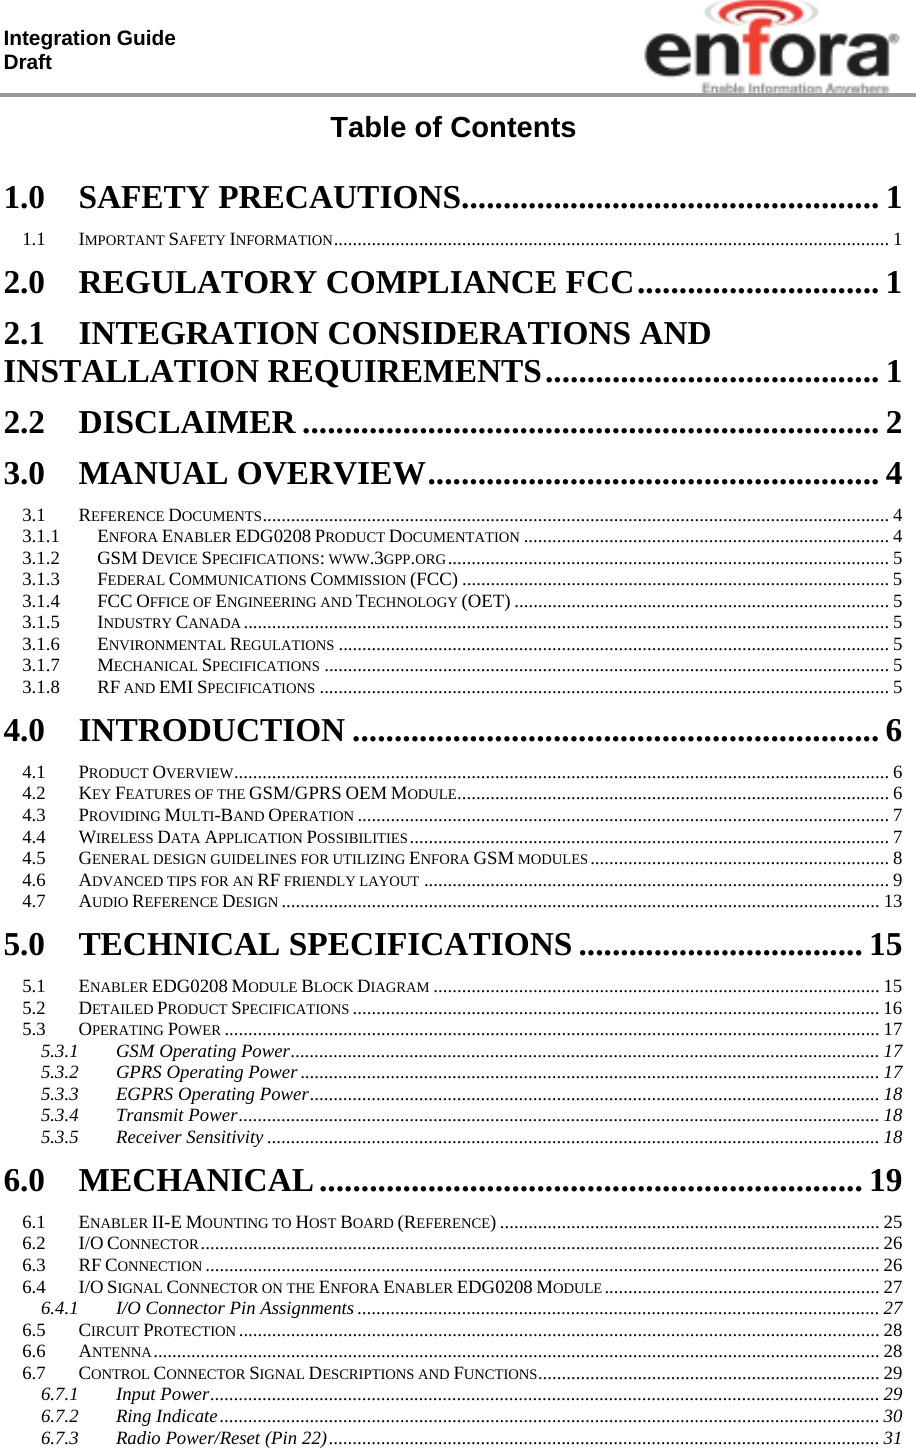 Integration Guide  Draft Table of Contents  1.0SAFETY PRECAUTIONS.................................................. 11.1IMPORTANT SAFETY INFORMATION ..................................................................................................................... 12.0REGULATORY COMPLIANCE FCC ............................. 12.1INTEGRATION CONSIDERATIONS AND INSTALLATION REQUIREMENTS ........................................  12.2DISCLAIMER ..................................................................... 23.0MANUAL OVERVIEW ...................................................... 43.1REFERENCE DOCUMENTS .................................................................................................................................... 43.1.1ENFORA ENABLER EDG0208 PRODUCT DOCUMENTATION ............................................................................. 43.1.2GSM DEVICE SPECIFICATIONS: WWW.3GPP.ORG ............................................................................................. 53.1.3FEDERAL COMMUNICATIONS COMMISSION (FCC) .......................................................................................... 53.1.4FCC OFFICE OF ENGINEERING AND TECHNOLOGY (OET) ............................................................................... 53.1.5INDUSTRY CANADA ........................................................................................................................................ 53.1.6ENVIRONMENTAL REGULATIONS .................................................................................................................... 53.1.7MECHANICAL SPECIFICATIONS ....................................................................................................................... 53.1.8RF AND EMI SPECIFICATIONS ........................................................................................................................ 54.0INTRODUCTION ............................................................... 64.1PRODUCT OVERVIEW .......................................................................................................................................... 64.2KEY FEATURES OF THE GSM/GPRS OEM MODULE ...........................................................................................  64.3PROVIDING MULTI-BAND OPERATION ................................................................................................................ 74.4WIRELESS DATA APPLICATION POSSIBILITIES .....................................................................................................  74.5GENERAL DESIGN GUIDELINES FOR UTILIZING ENFORA GSM MODULES ...............................................................  84.6ADVANCED TIPS FOR AN RF FRIENDLY LAYOUT .................................................................................................. 94.7AUDIO REFERENCE DESIGN .............................................................................................................................. 135.0TECHNICAL SPECIFICATIONS .................................. 155.1ENABLER EDG0208 MODULE BLOCK DIAGRAM .............................................................................................. 155.2DETAILED PRODUCT SPECIFICATIONS ............................................................................................................... 165.3OPERATING POWER .......................................................................................................................................... 175.3.1GSM Operating Power ............................................................................................................................ 175.3.2GPRS Operating Power .......................................................................................................................... 175.3.3EGPRS Operating Power ........................................................................................................................ 185.3.4Transmit Power ....................................................................................................................................... 185.3.5Receiver Sensitivity ................................................................................................................................. 186.0MECHANICAL ................................................................. 196.1ENABLER II-E MOUNTING TO HOST BOARD (REFERENCE) ................................................................................ 256.2I/O CONNECTOR ............................................................................................................................................... 266.3RF CONNECTION .............................................................................................................................................. 266.4I/O SIGNAL CONNECTOR ON THE ENFORA ENABLER EDG0208 MODULE ..........................................................  276.4.1I/O Connector Pin Assignments .............................................................................................................. 276.5CIRCUIT PROTECTION ....................................................................................................................................... 286.6ANTENNA ......................................................................................................................................................... 286.7CONTROL CONNECTOR SIGNAL DESCRIPTIONS AND FUNCTIONS ........................................................................  296.7.1Input Power ............................................................................................................................................. 296.7.2Ring Indicate ........................................................................................................................................... 306.7.3Radio Power/Reset (Pin 22) .................................................................................................................... 31